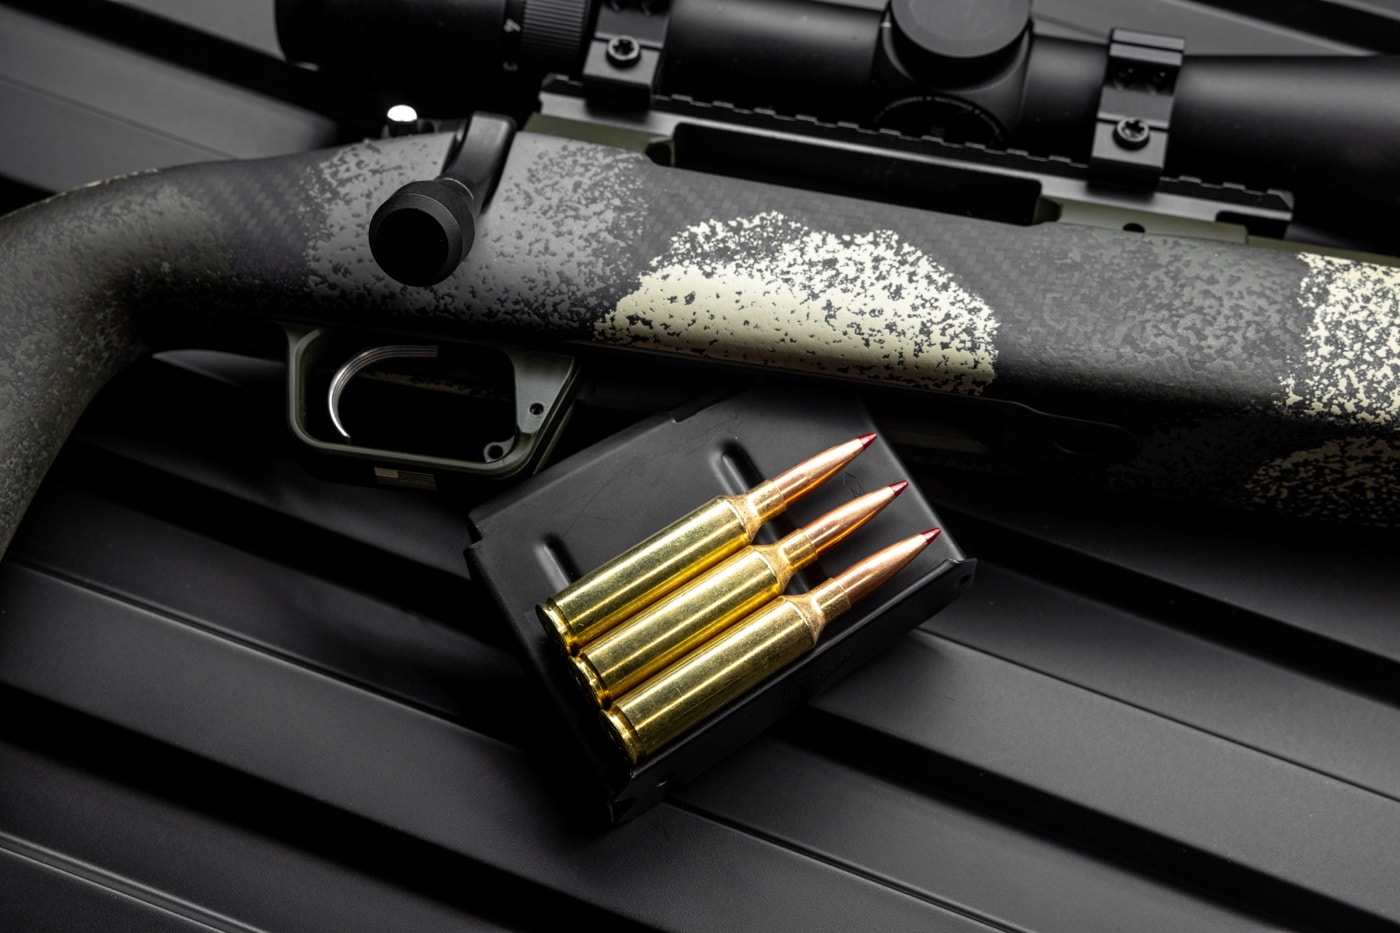 In this photo of the Springfield Armory Model 2020 Long Action Waypoint review we see some of the new rifle cartridges available for this bolt action rifle. The rifle is accurate, precise and reliable.